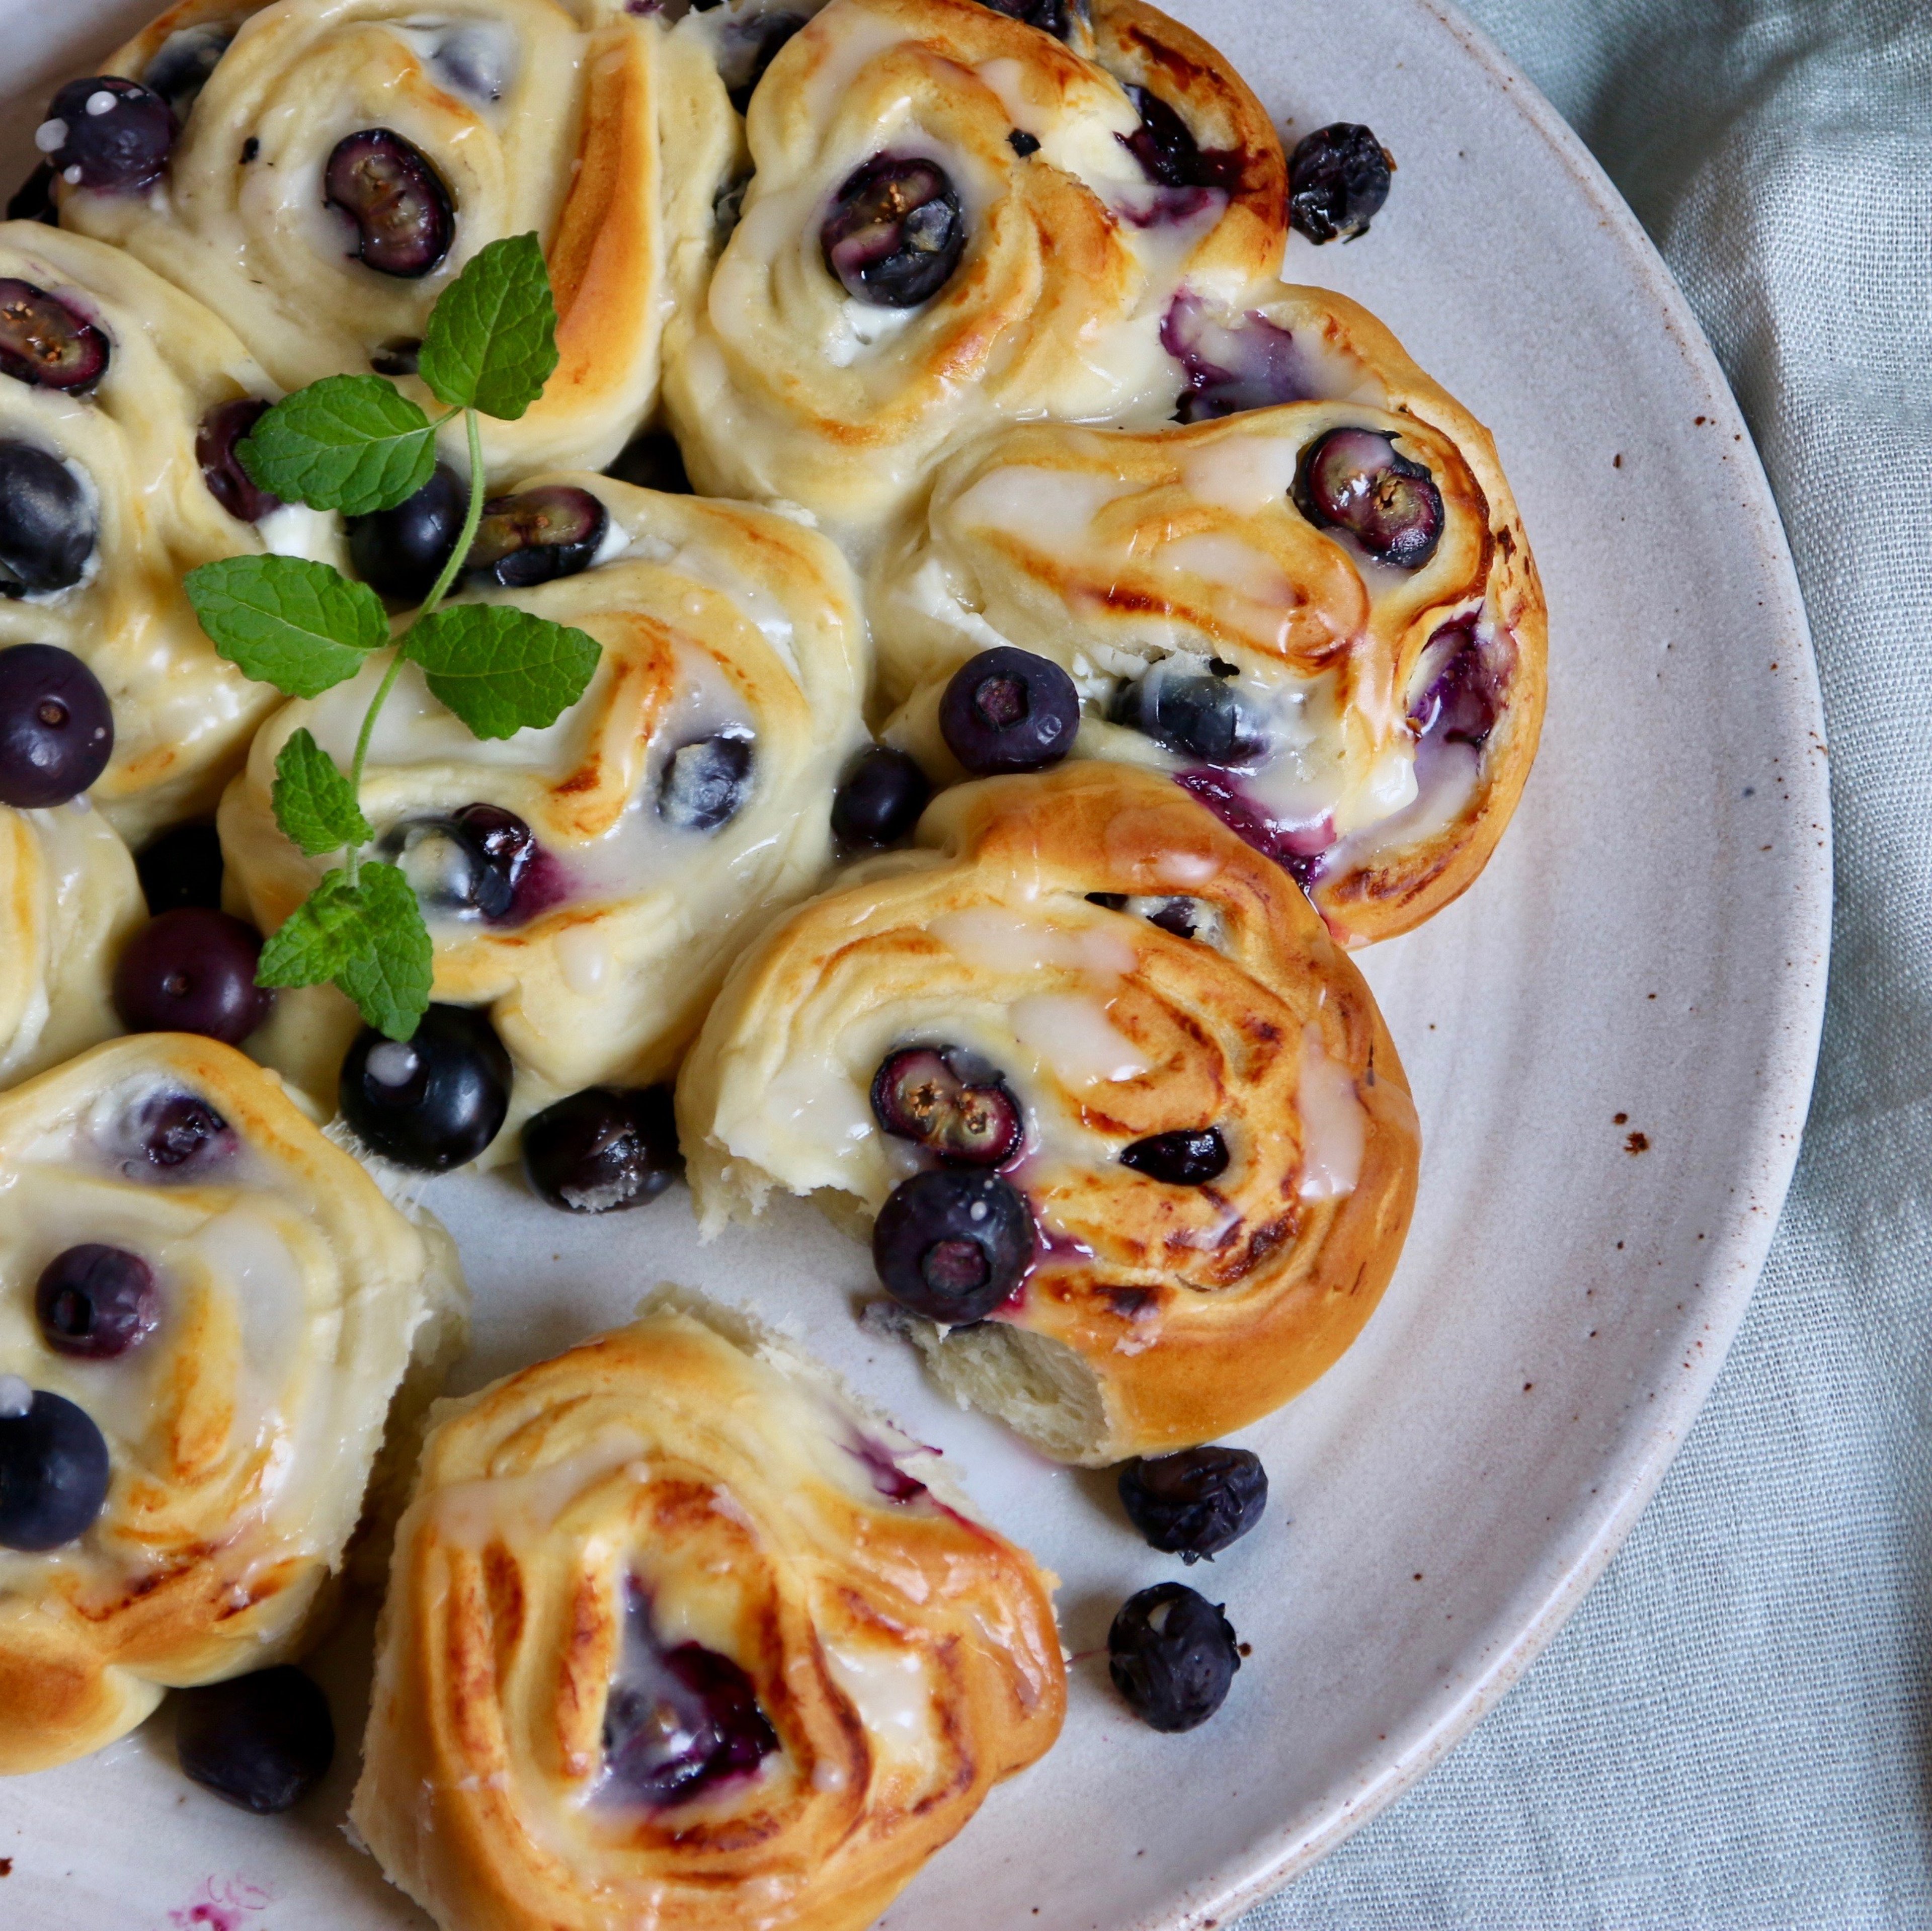 Blueberry rolls with quark filling